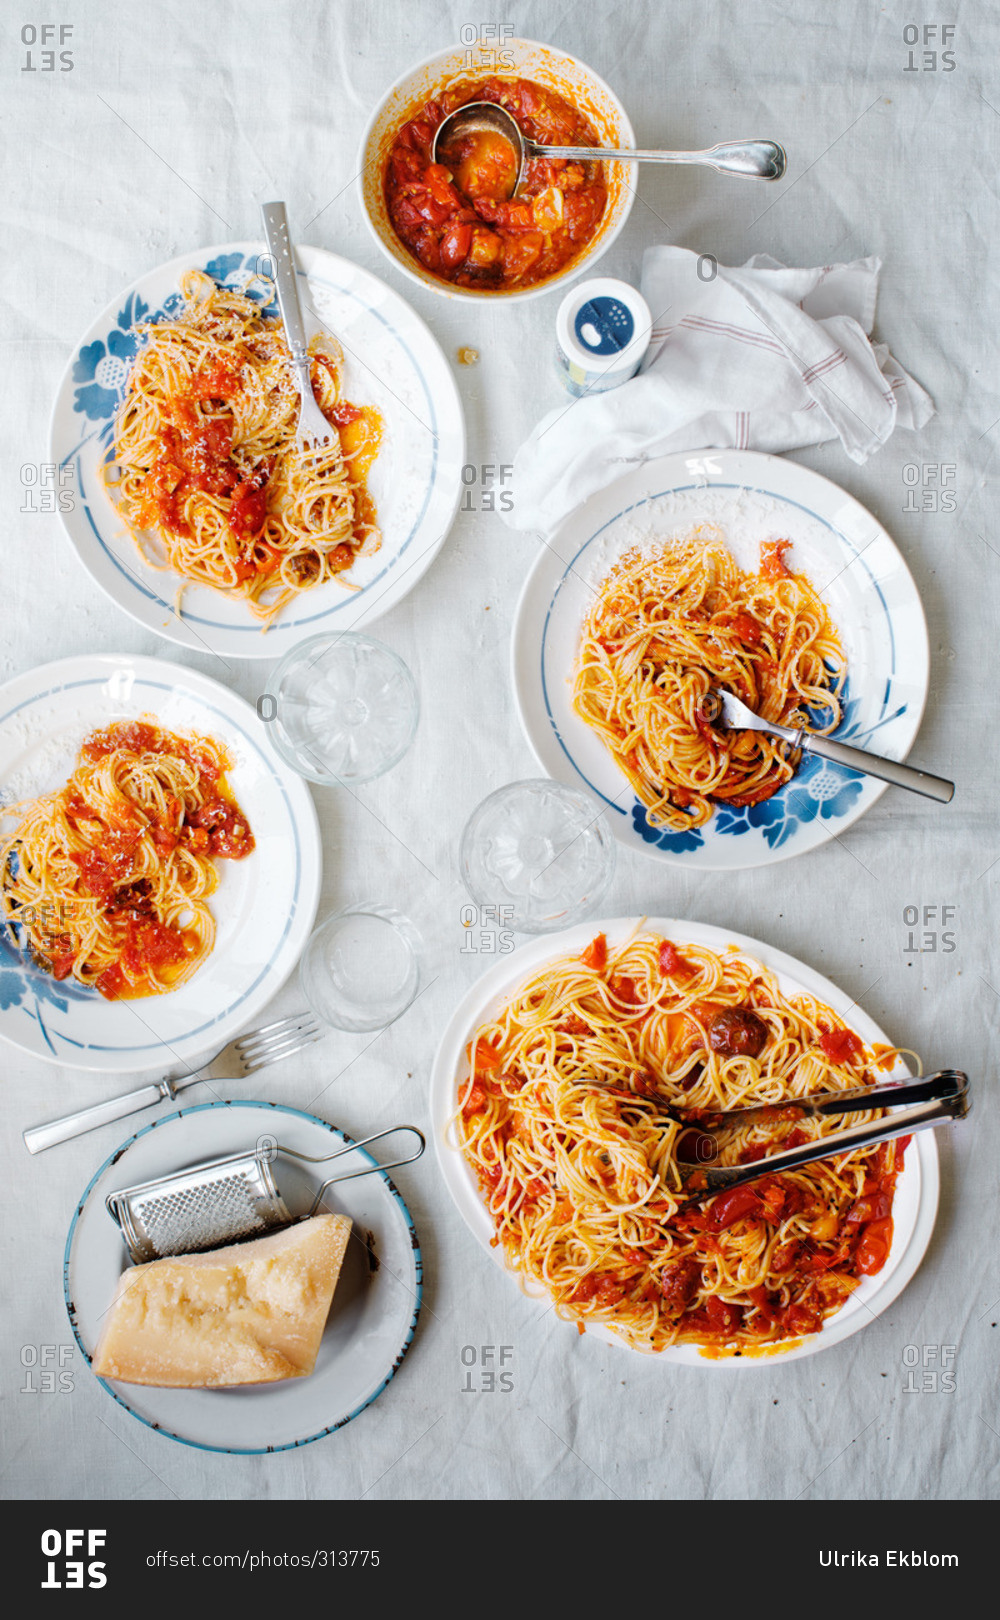 Blue floral plates filled with spaghetti and tomato sauce